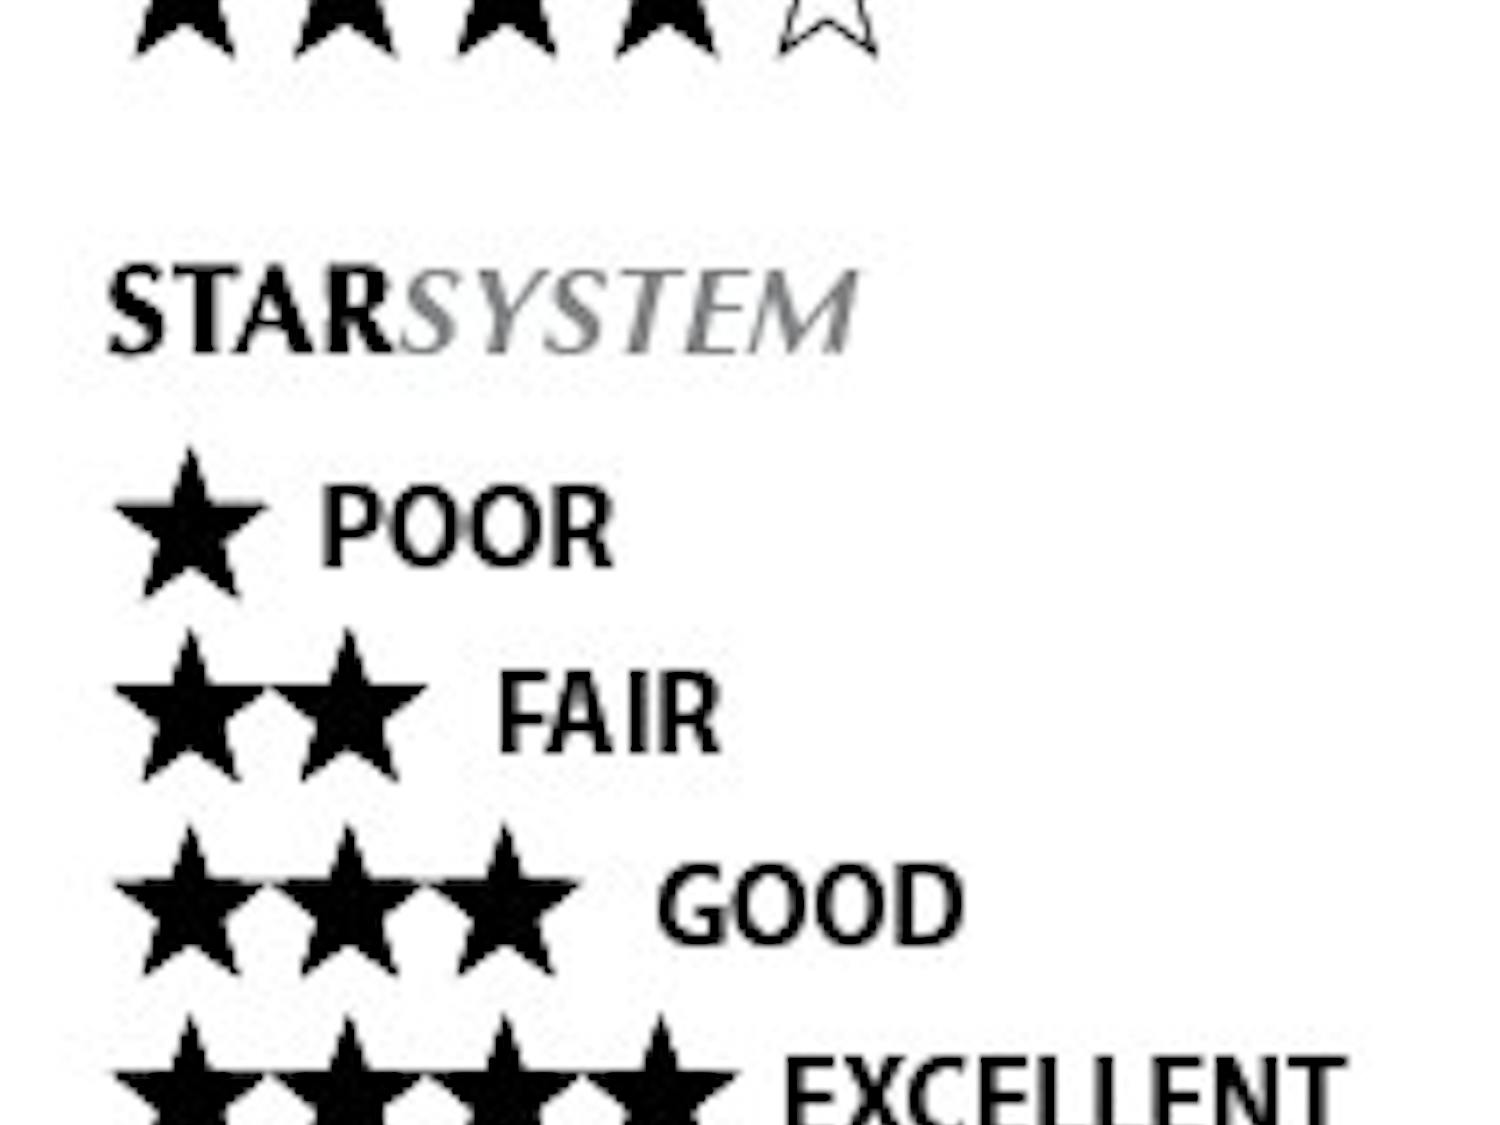 Dive gives 4 of 5 stars